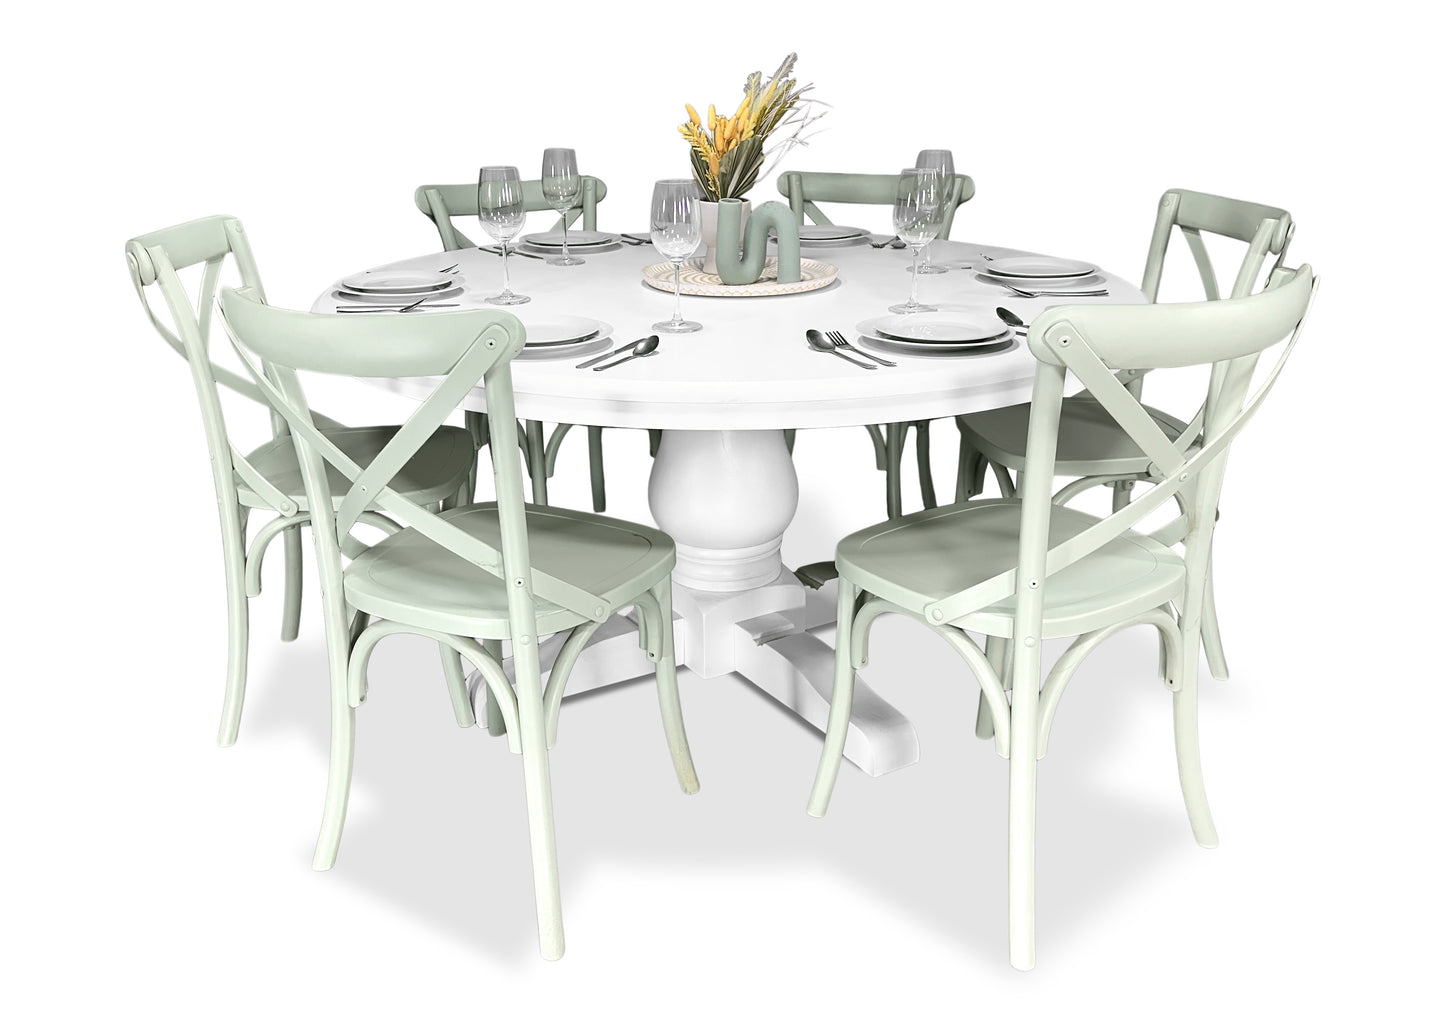 Parisienne Dining Table - White (1500mm)